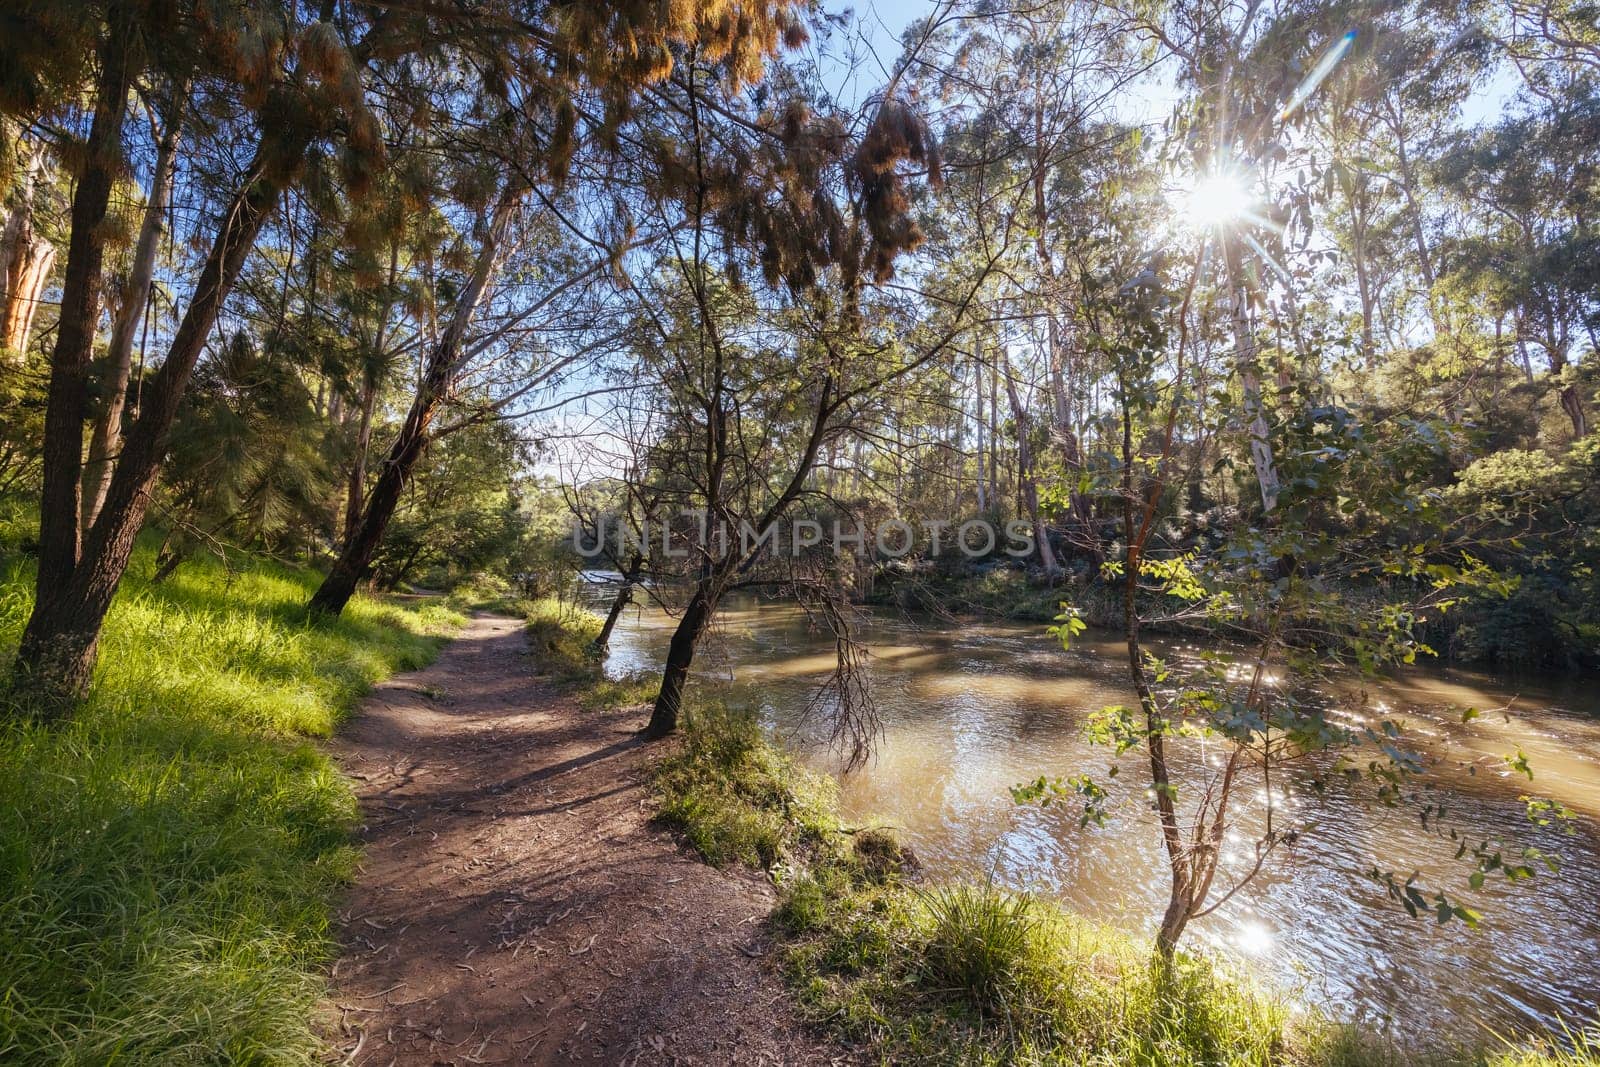 Warrandyte River Reserve and surrounding landscape on a cool autumn day in Warrandyte, Victoria, Australia.